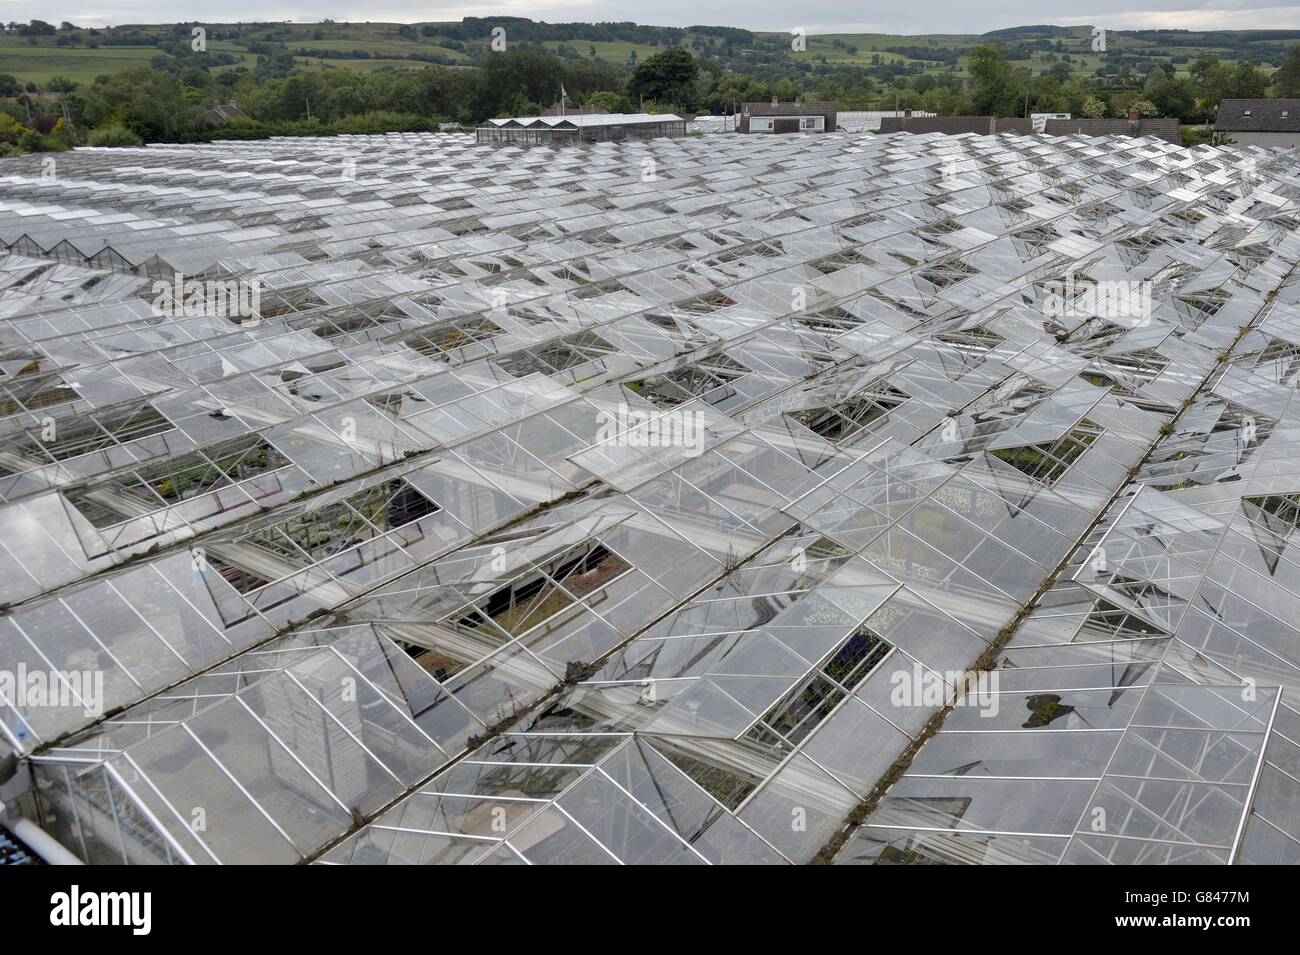 A view of some of the damaged greenhouses at Ravensworth Nurseries in Richmond, North Yorkshire, after giant hailstones smashed up to 5,000 greenhouse panes at the nursery in storms overnight. Stock Photo